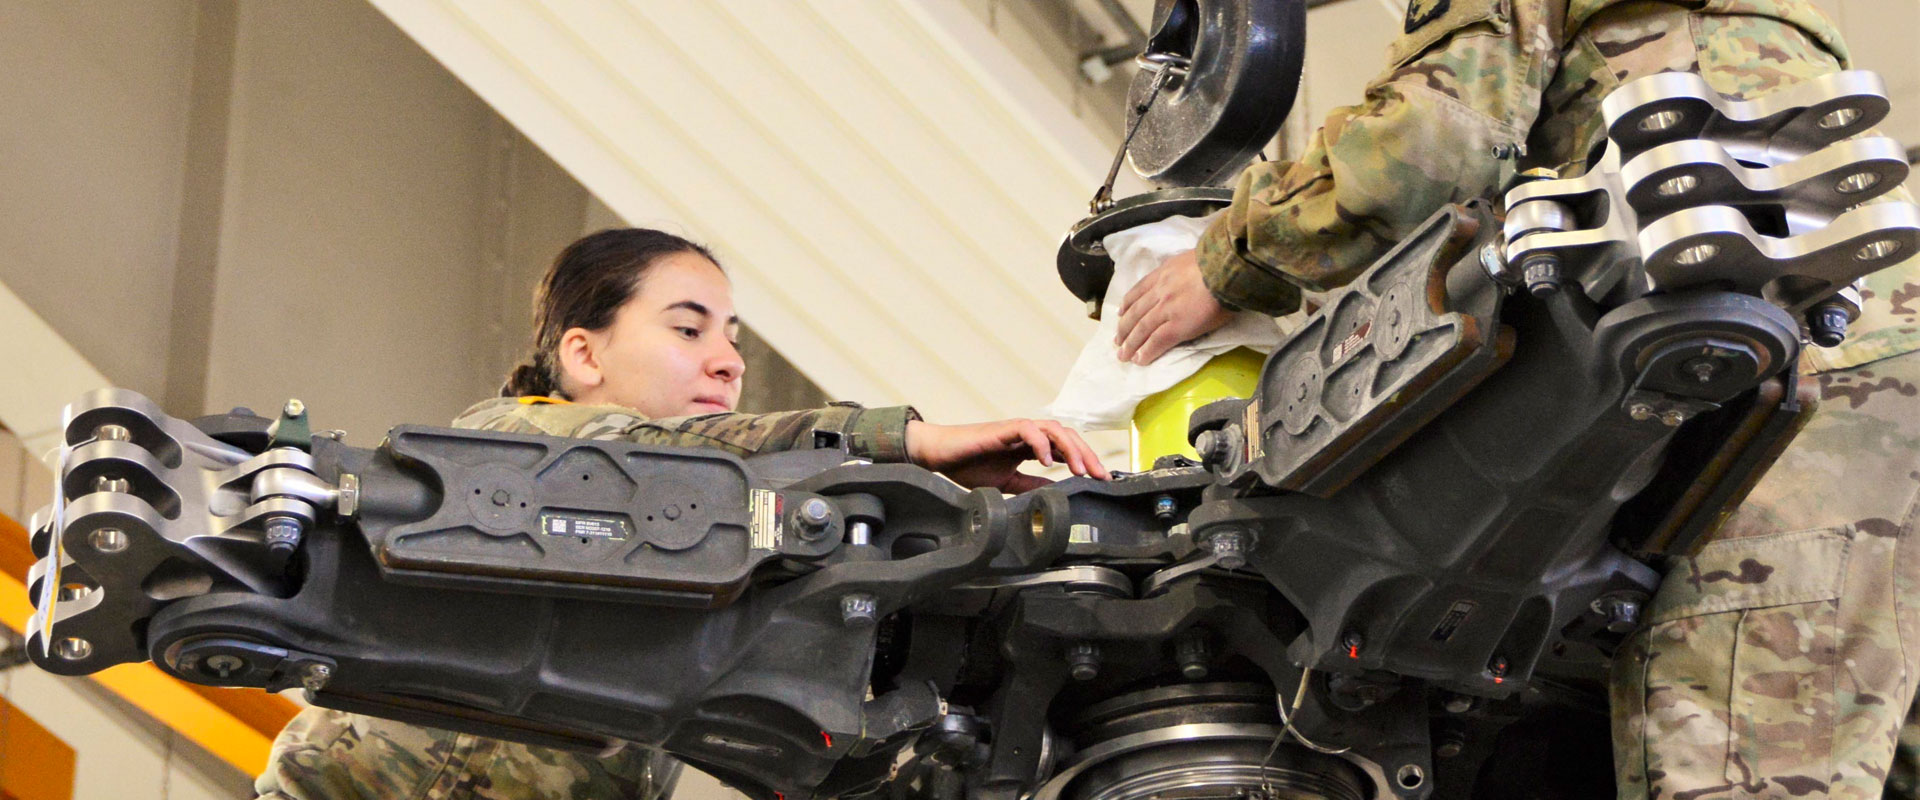 Careers for Army Technicians through Orion Talent